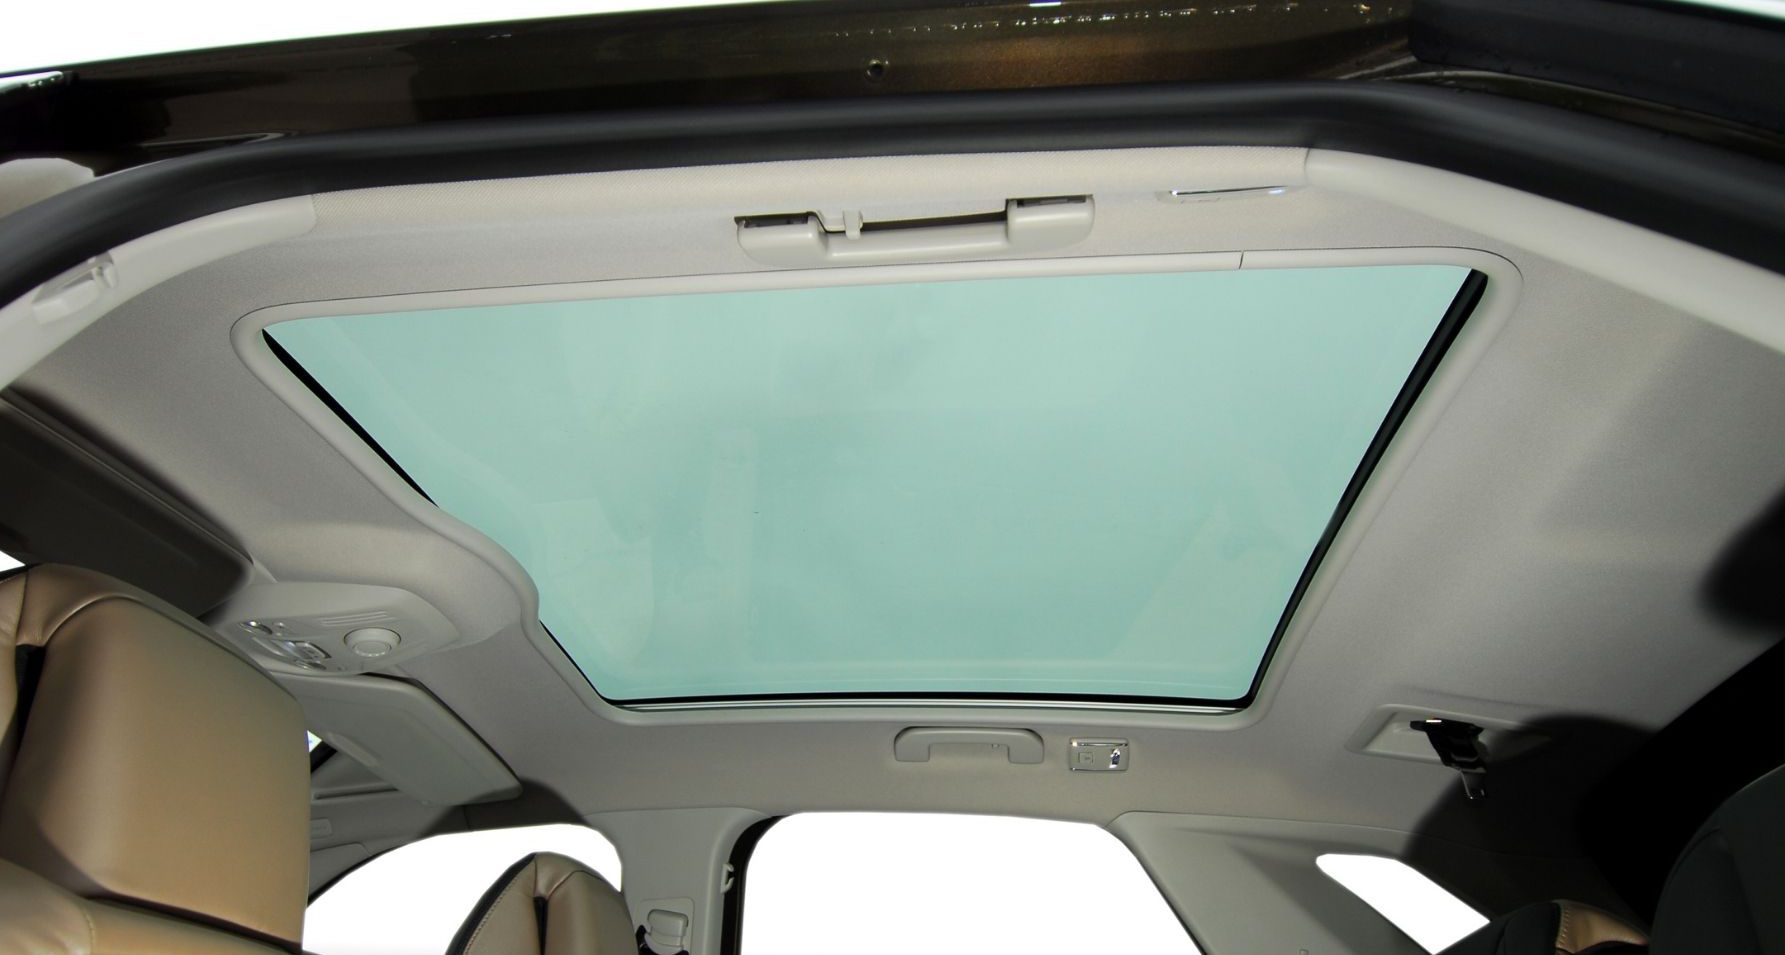 Global Automotive Sunroof Market Size, Forecasts, And Opportunities – Includes Automotive Sunroof Market Trends